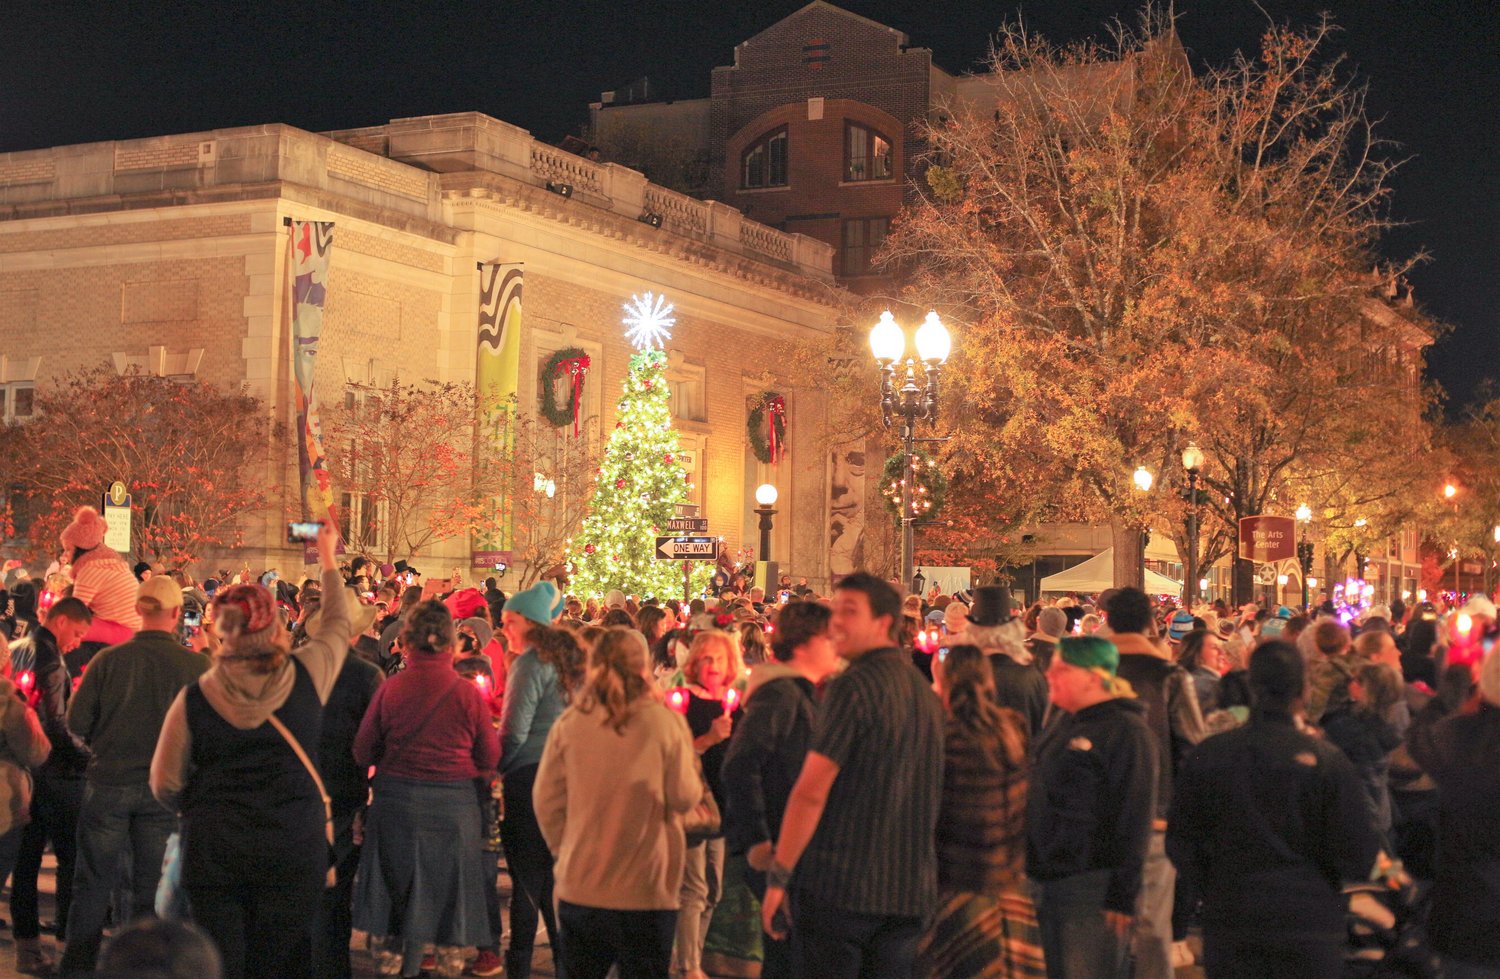 Downtown Fayetteville will be home to two celebrations the day after Thanksgiving. The Arts Council of Fayetteville/Cumberland County will launch Holidays on Hay … A Season of Light, bringing a state-of-the-art light magic to the streets. And the Downtown Alliance becomes the new sponsor of A Dickens Holiday.